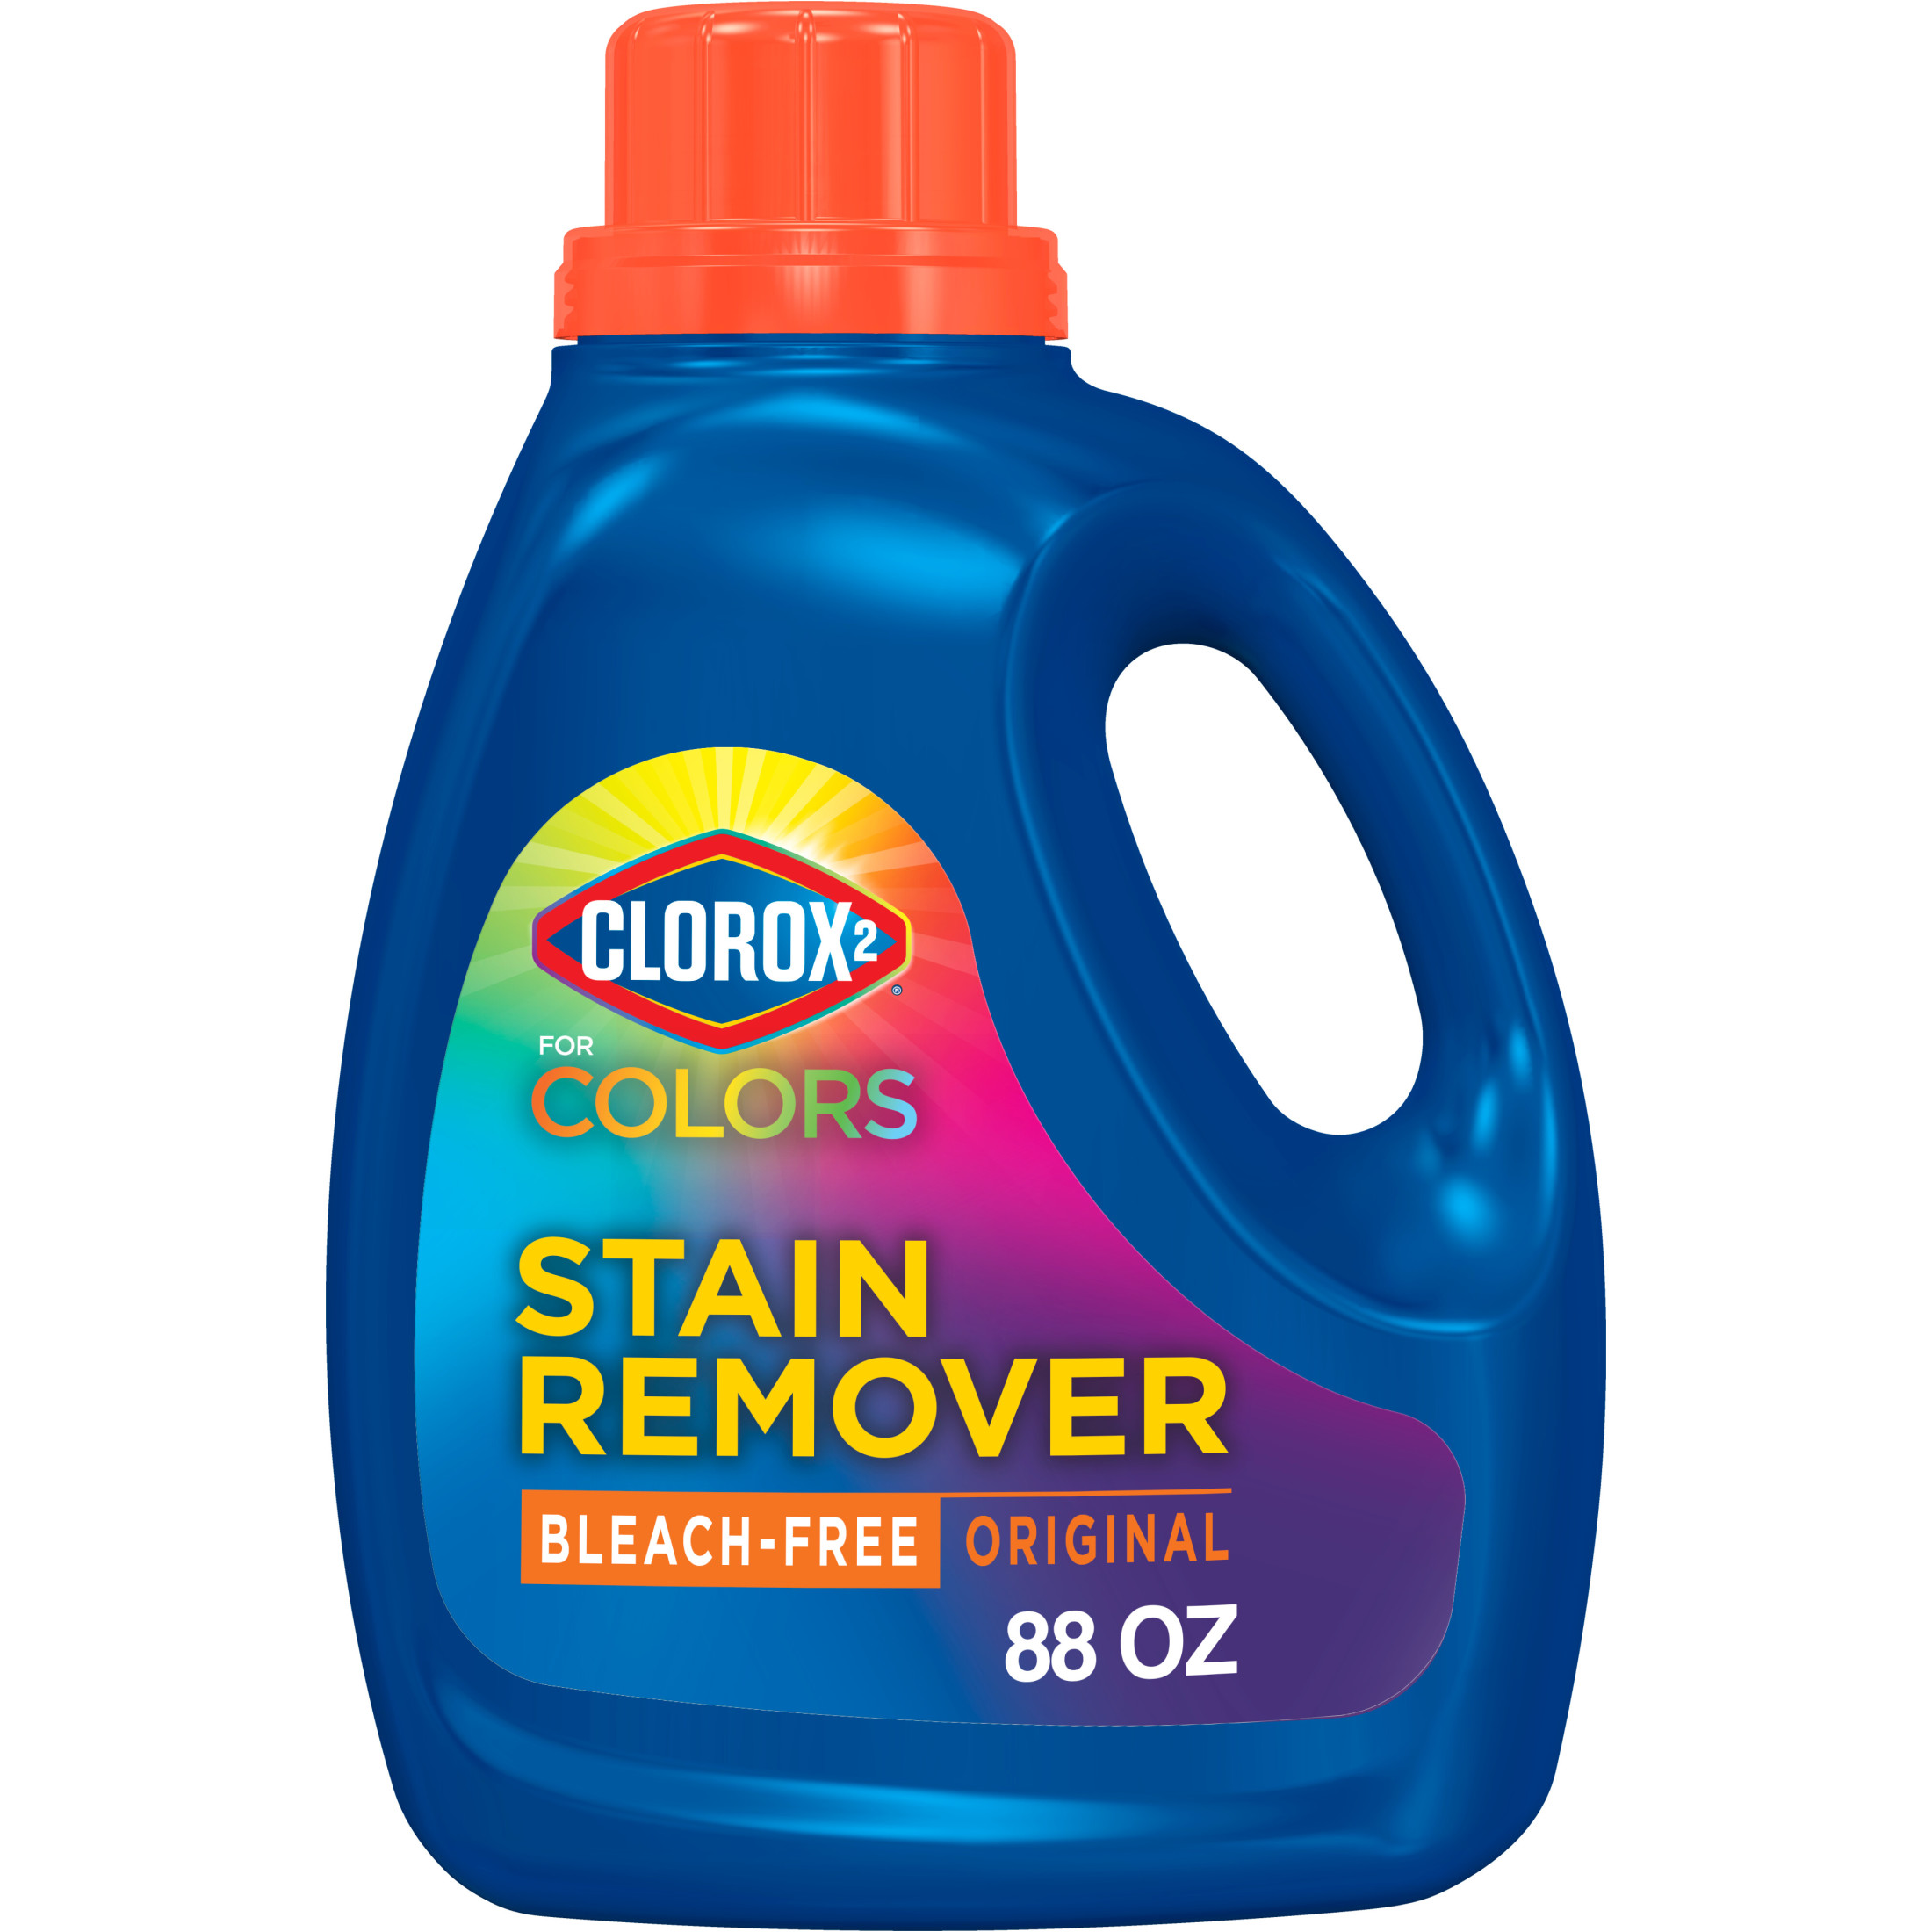 Clorox 2 for Colors Stain Remover and Laundry Additive, Bleach Free, Original, 88 Fluid Ounces - image 1 of 11